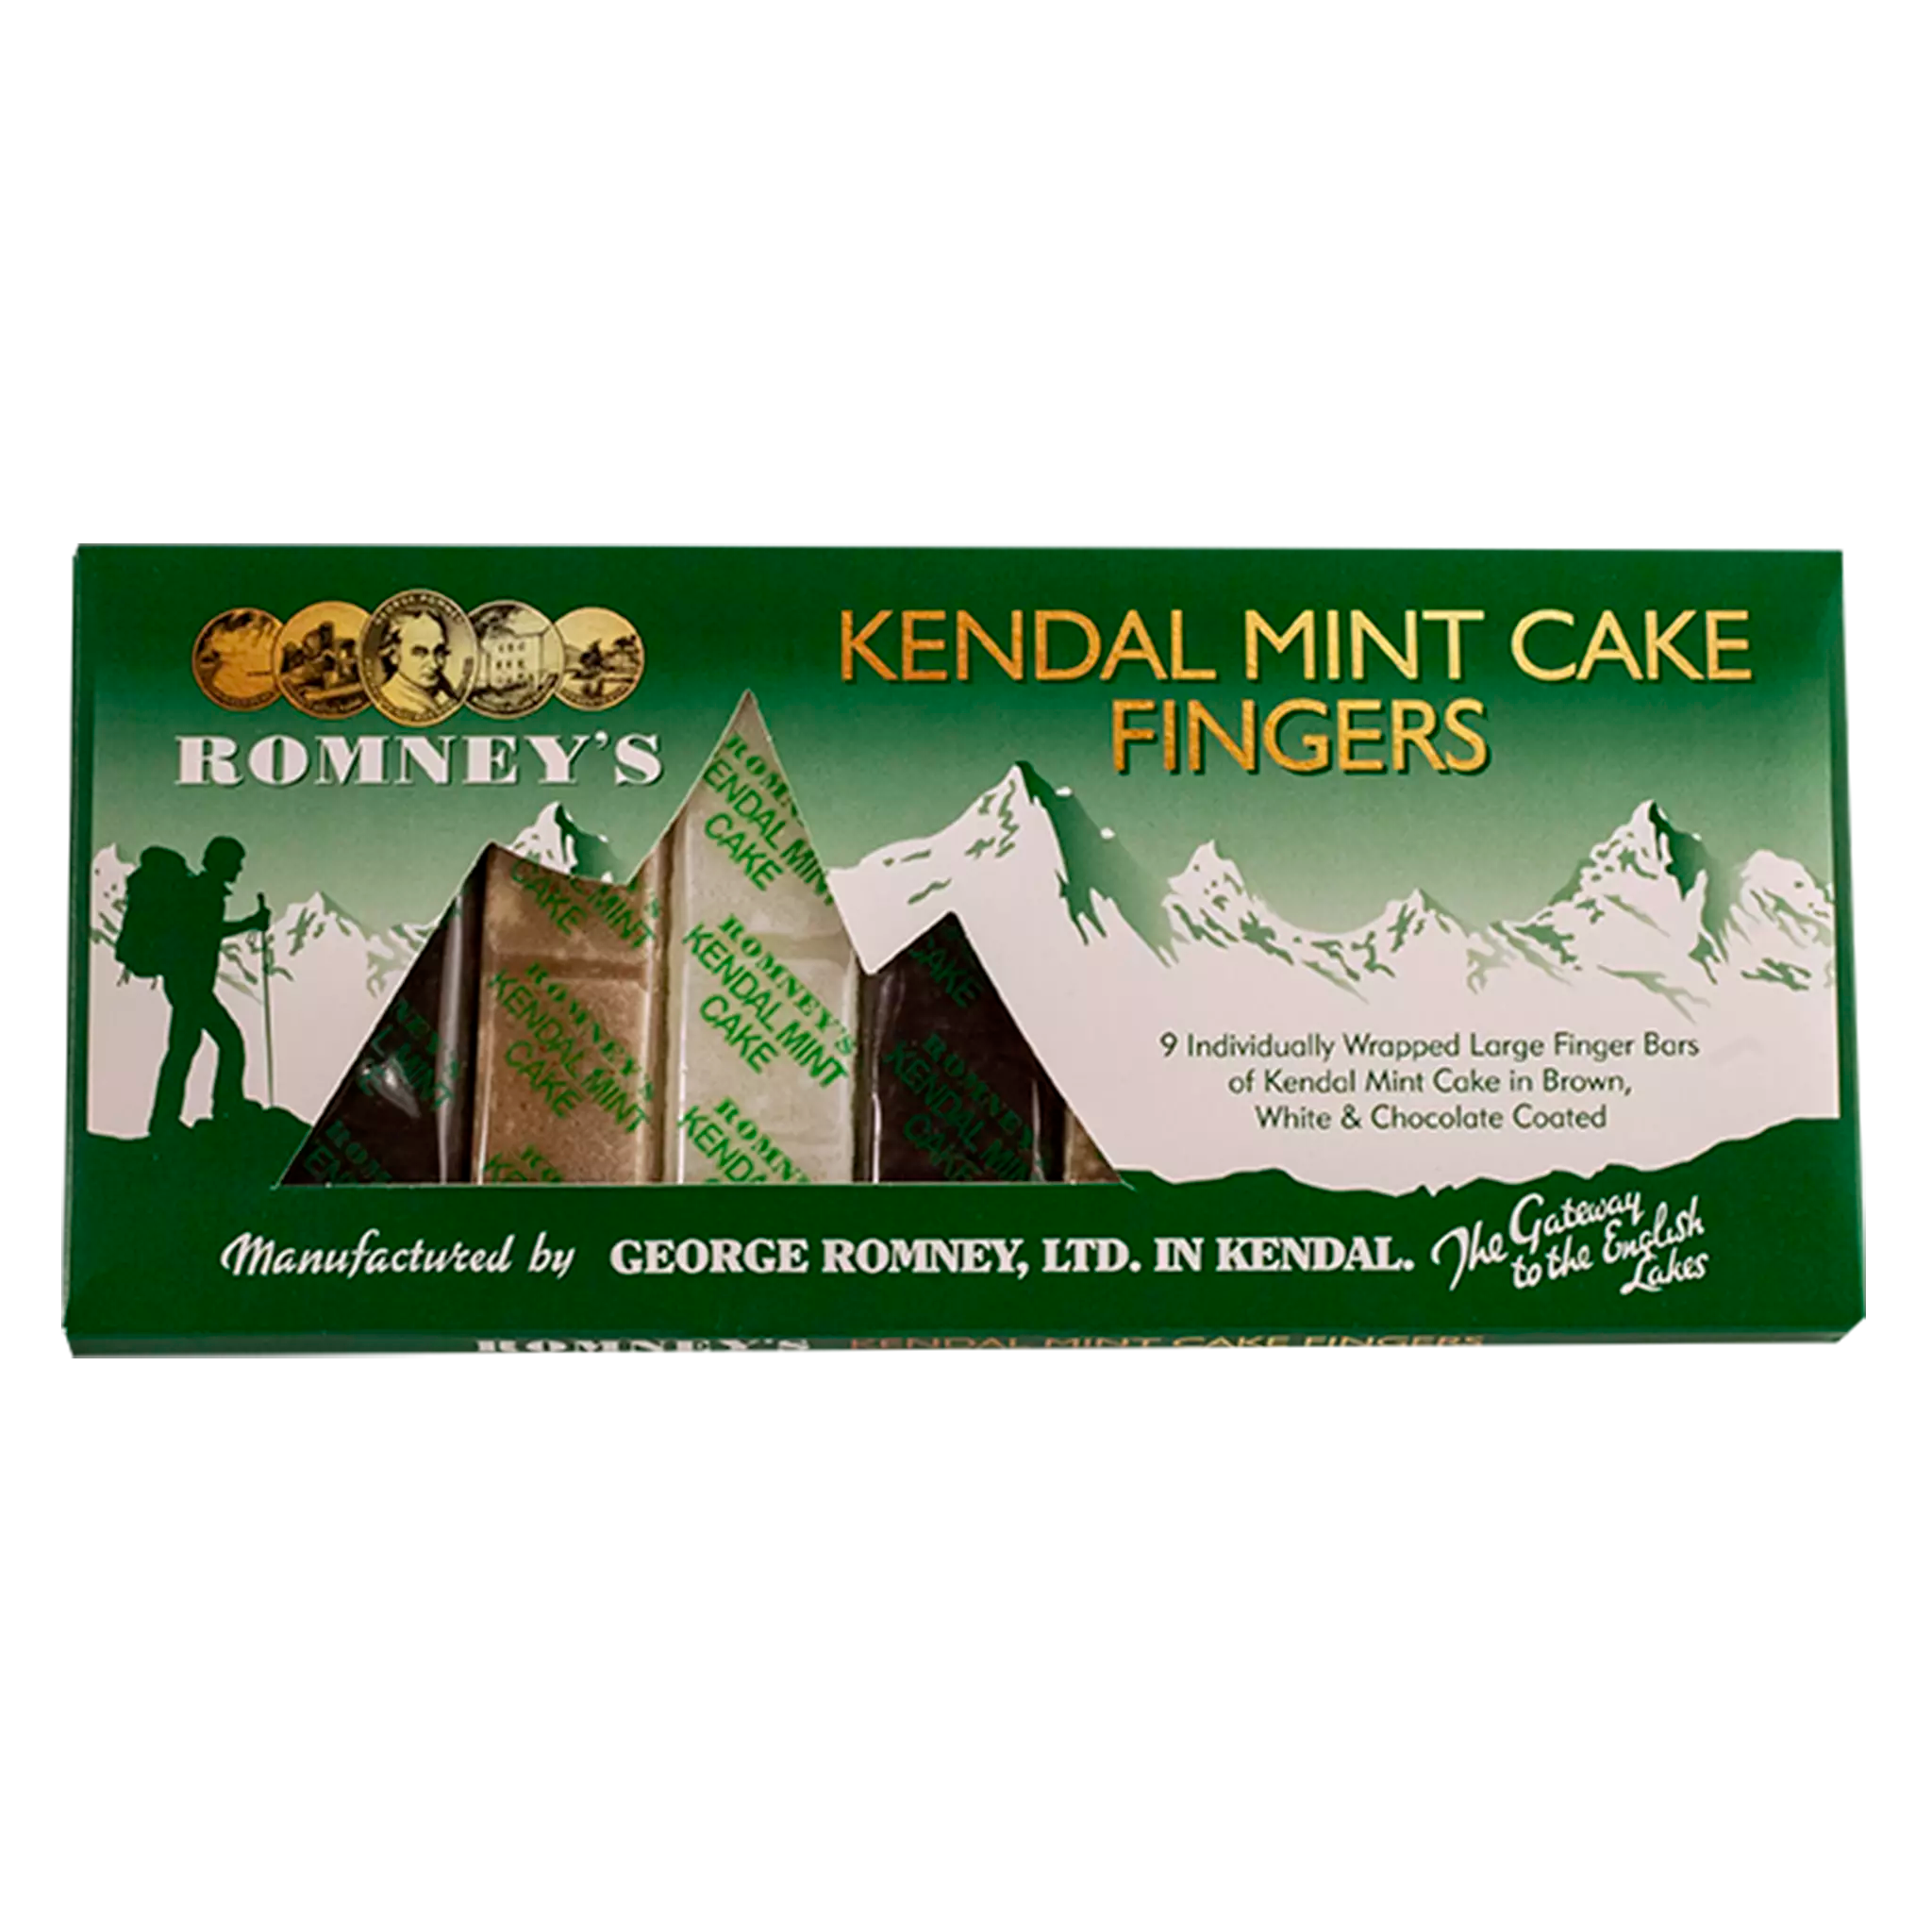 A rectangular cardboard box containing 9 Kendal Mint Cake fingers. The flavours contained are White, Brown & Chocolate Coated Kendal Mint Cake, all of which are individually wrapped in a transparent wrapper and a number of the fingers are visible through mountain shaped window. The box is mainly green with a white mountain backdrop. It also features the Romney's logo and the words 'Kendal Mint Cake Fingers' are written in gold font.